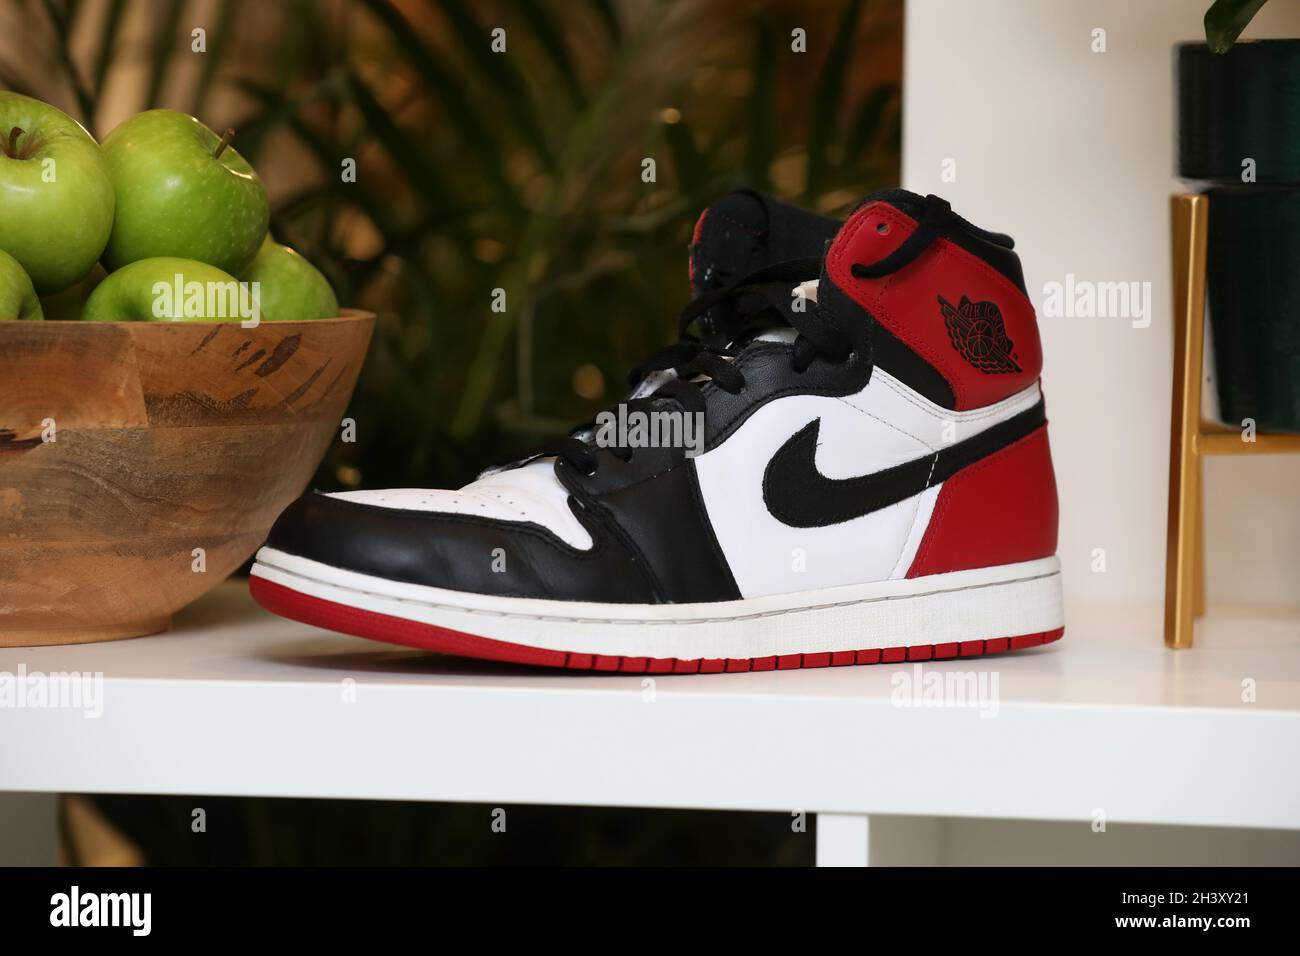 at lege Goneryl Rang Original, rare Nike Air Jordan Trainers from the 1980's pictured in a  trainer shop in Portsmouth, Hampshire, UK Stock Photo - Alamy